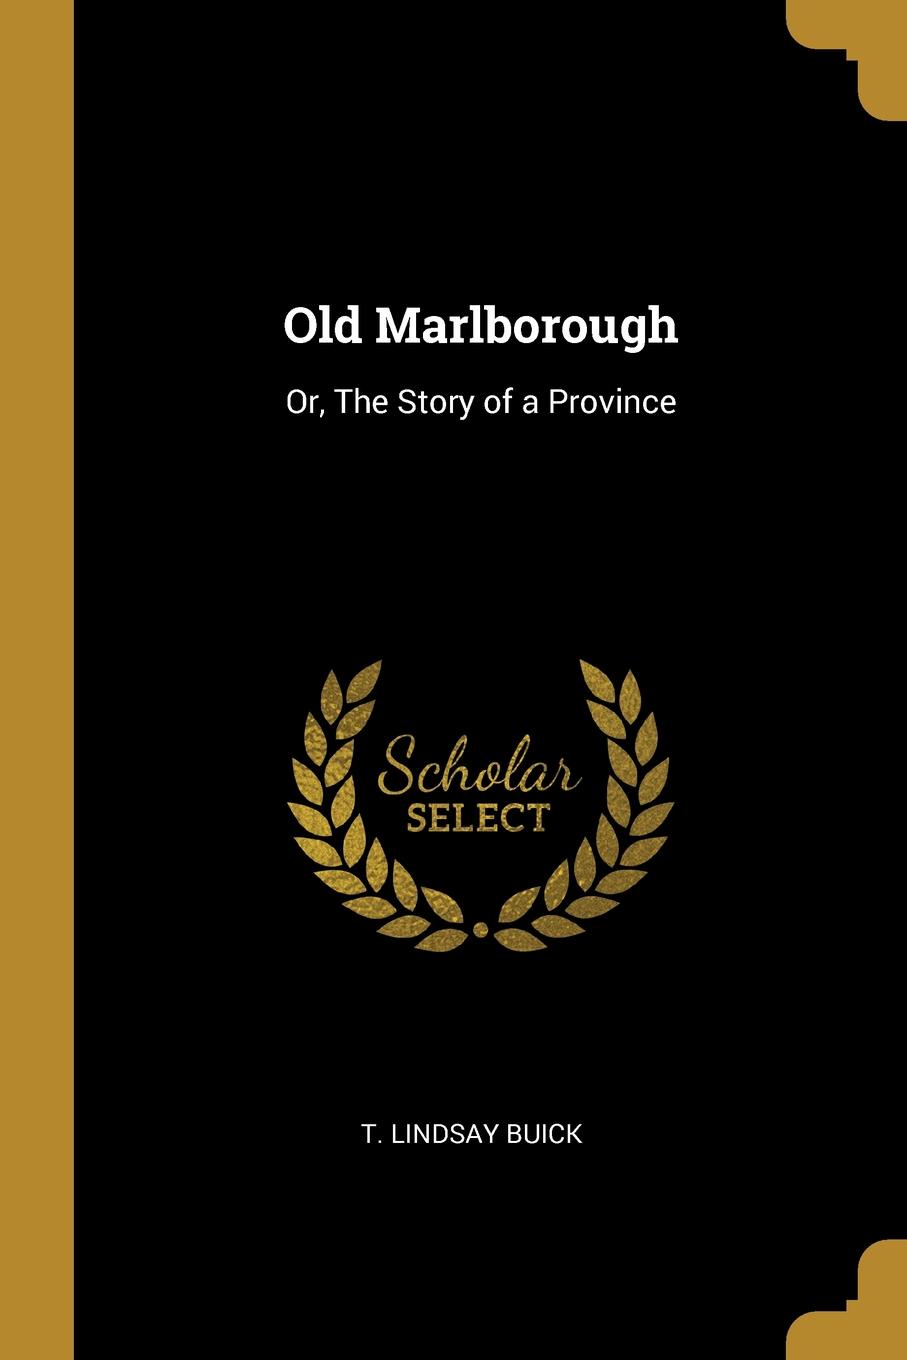 Old Marlborough. Or, The Story of a Province